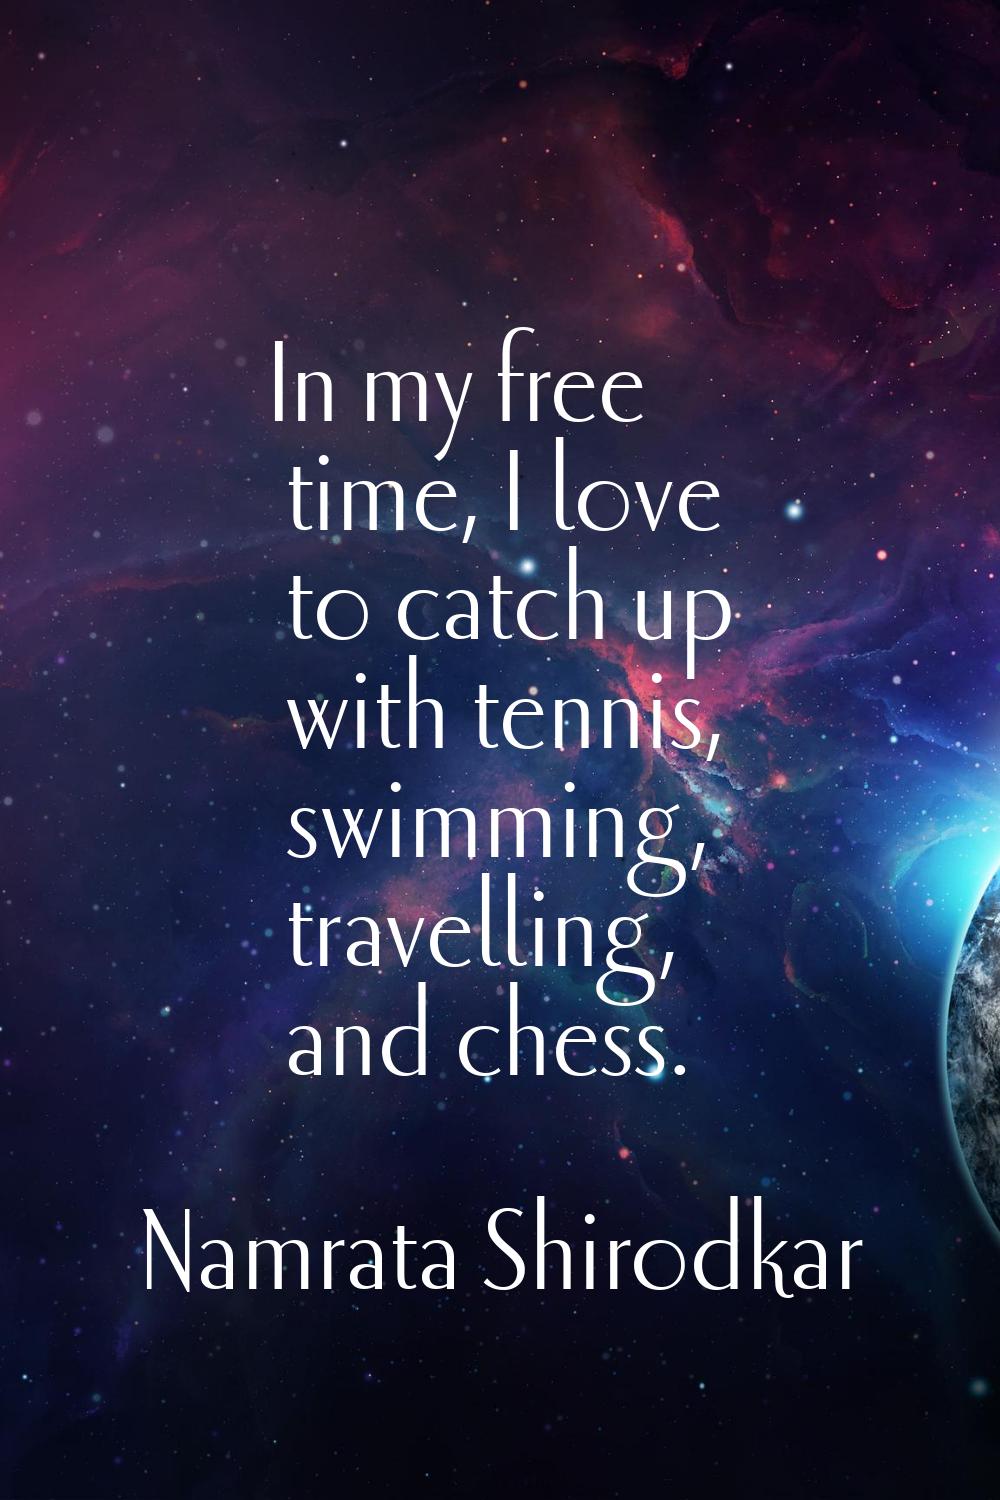 In my free time, I love to catch up with tennis, swimming, travelling, and chess.